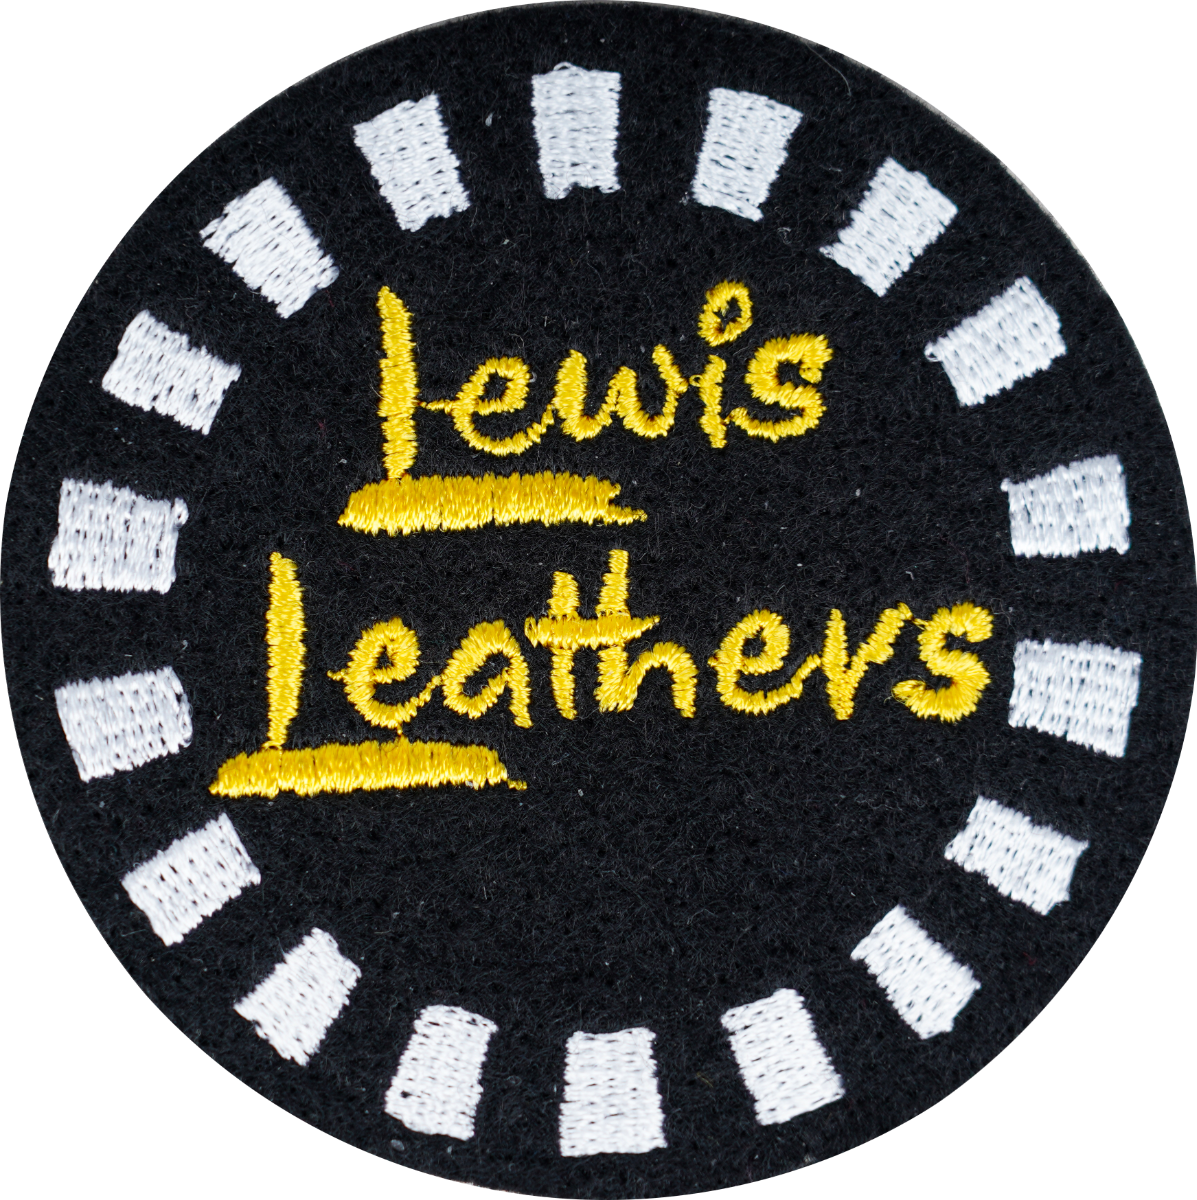 Lewis Leathers Checker Round Patch